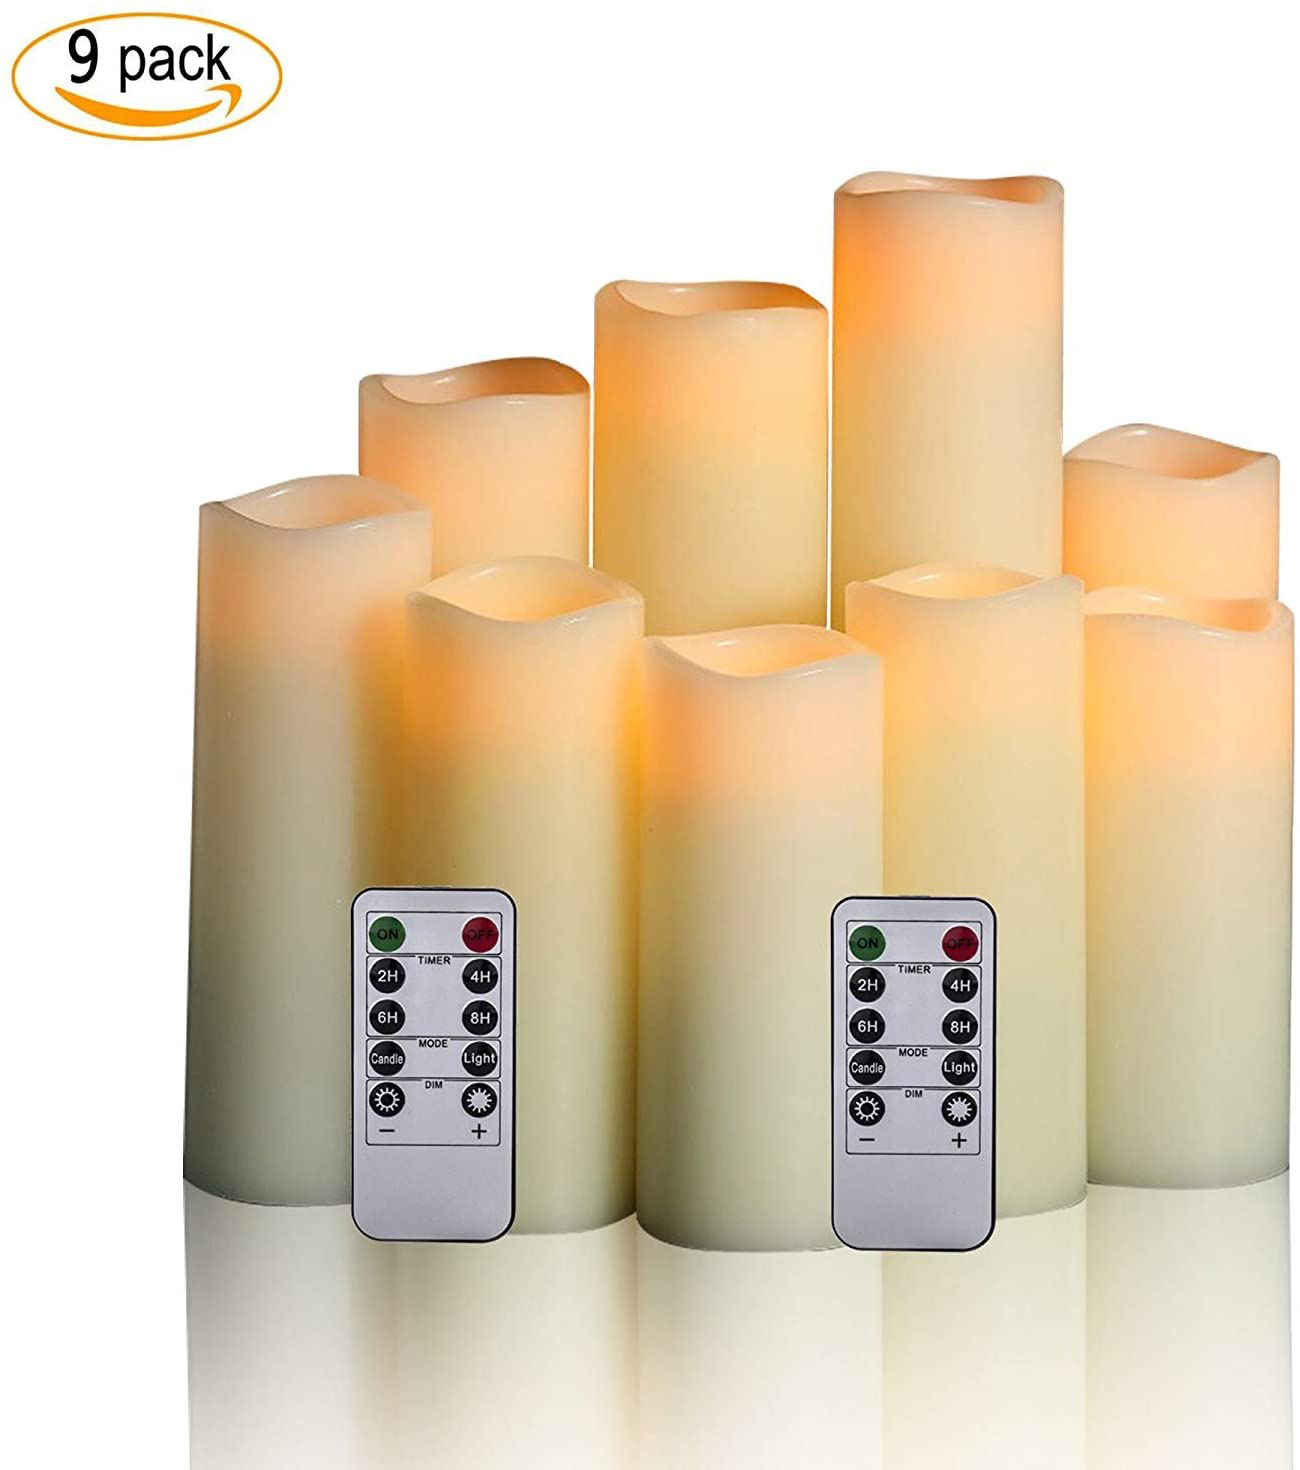 Antizer Flameless Candles Led Candles Pack of 9 (H 4" 5" 6" 7" 8" 9" X D 2.2") Ivory Real Wax Battery Candles with Remote Timer